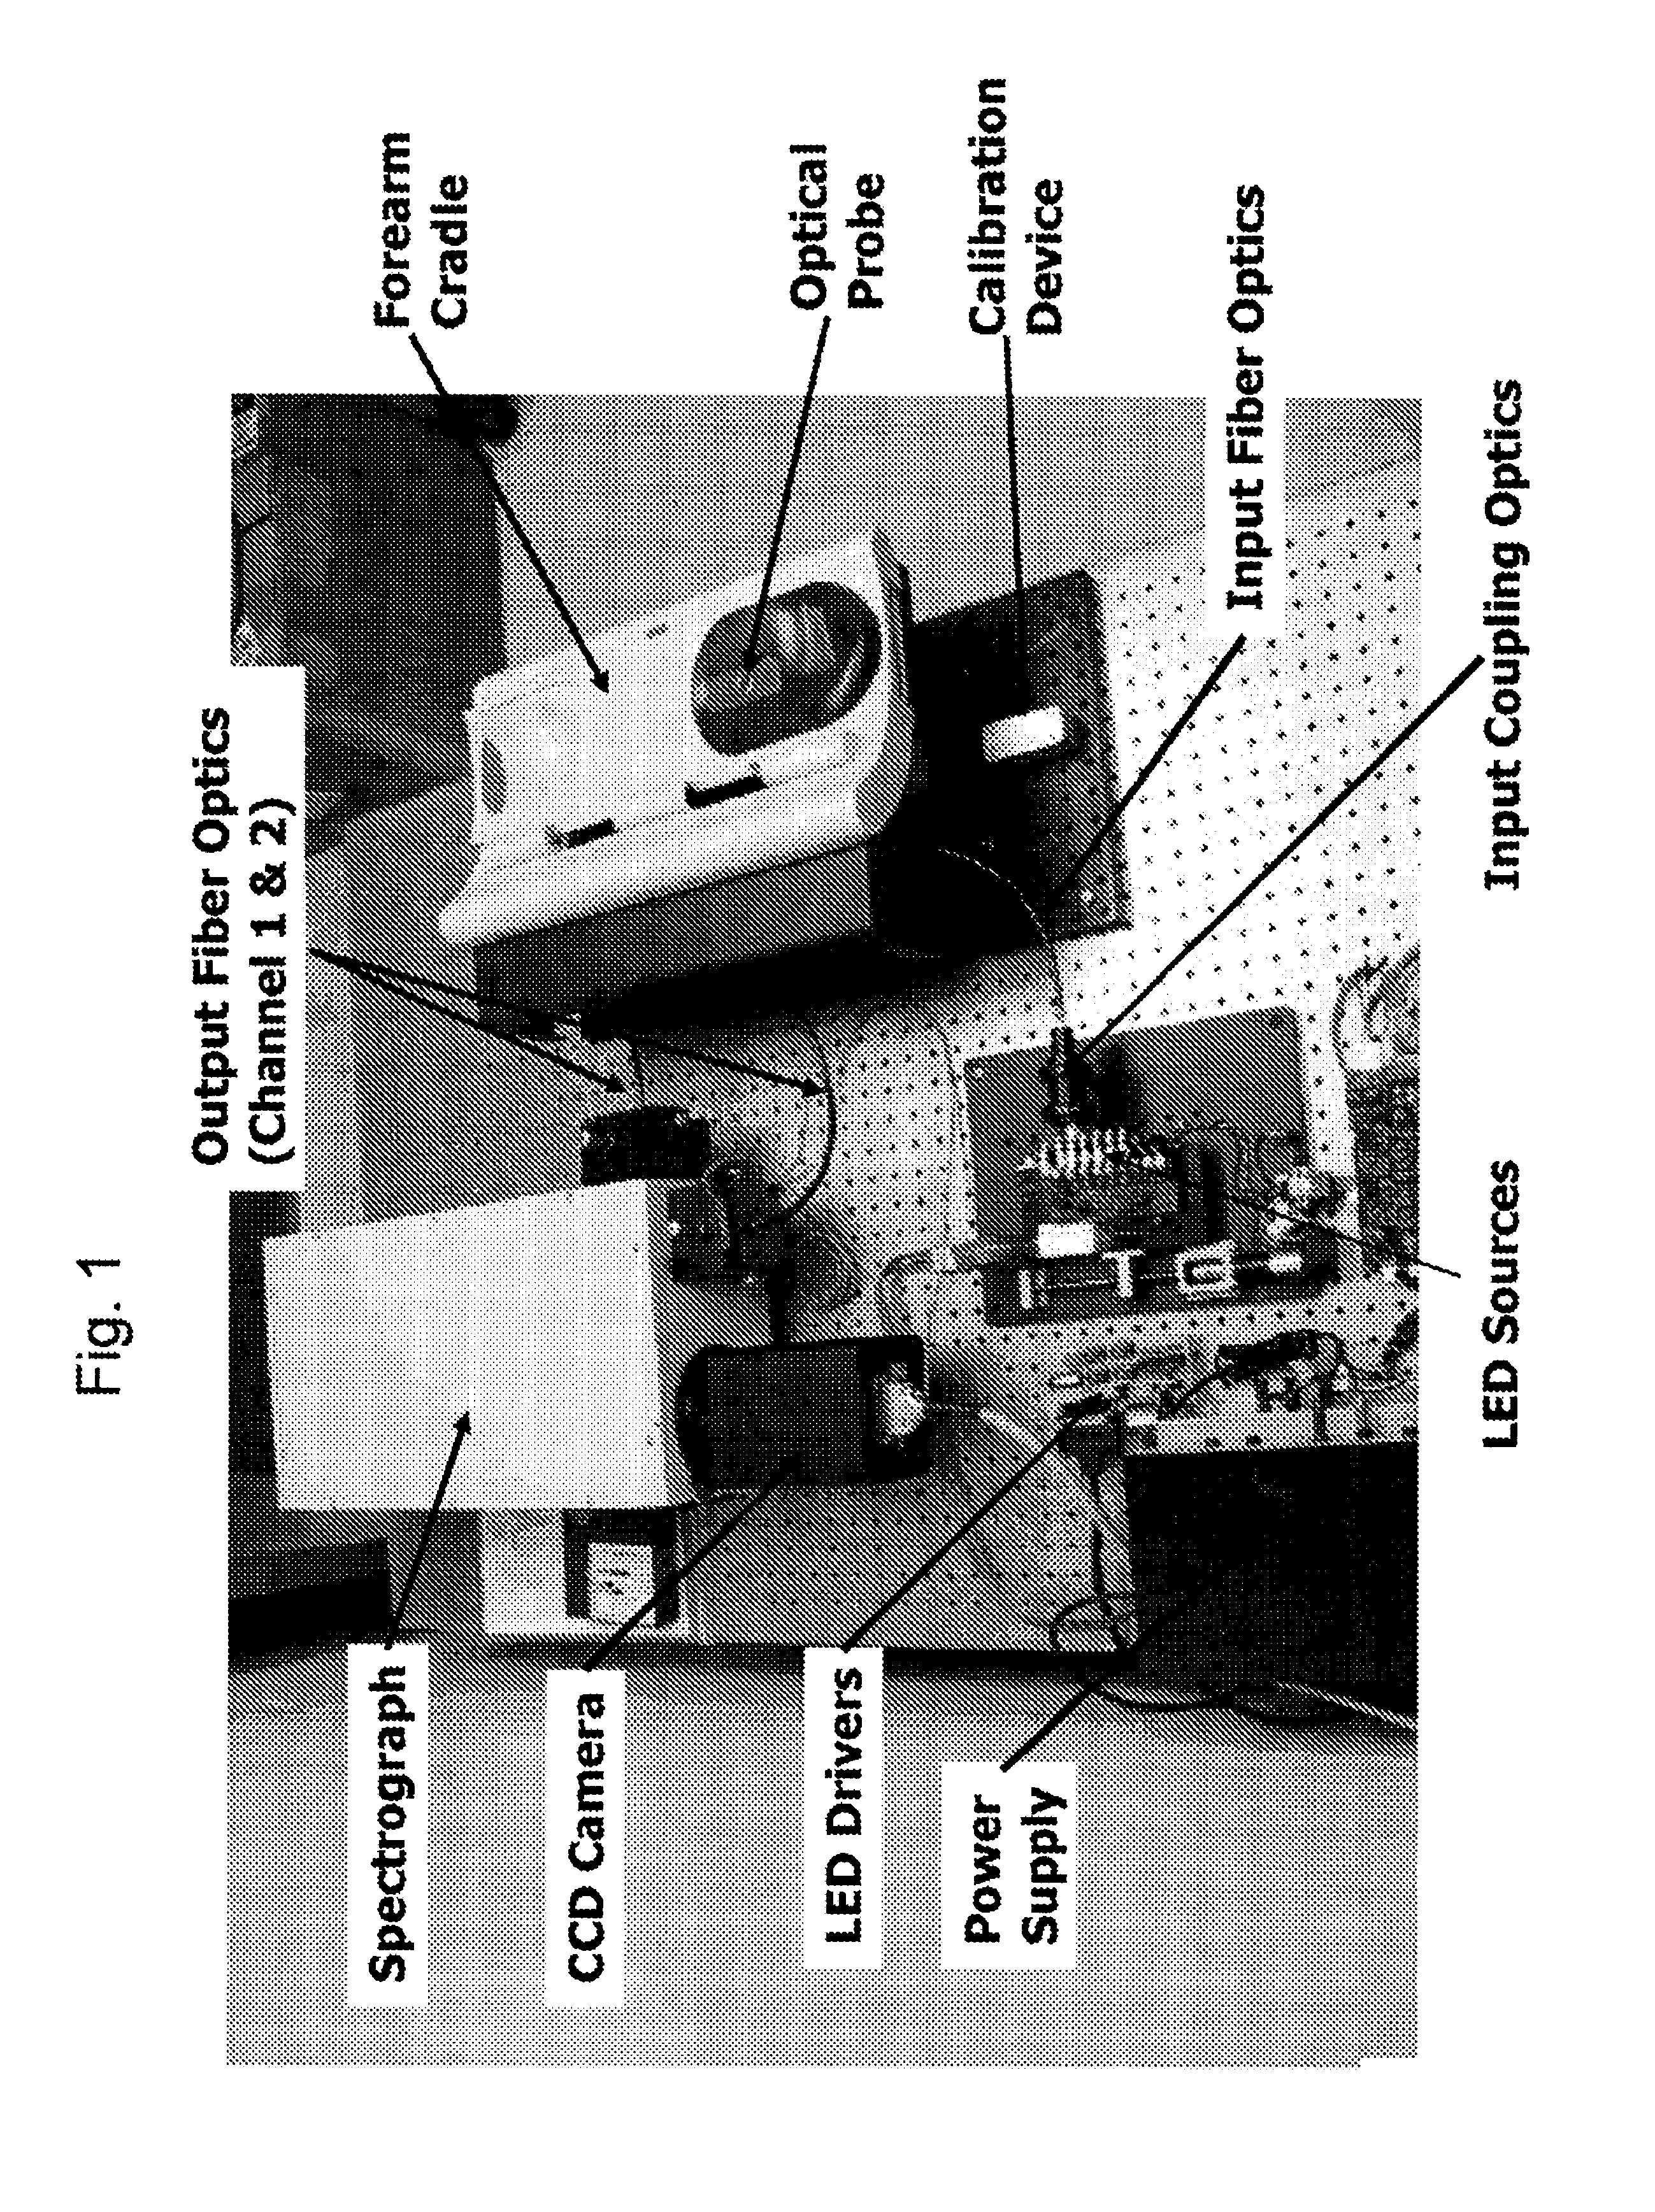 Method and Apparatus for Determination of a Measure of a Glycation End-Product or Disease State Using Tissue Fluorescence